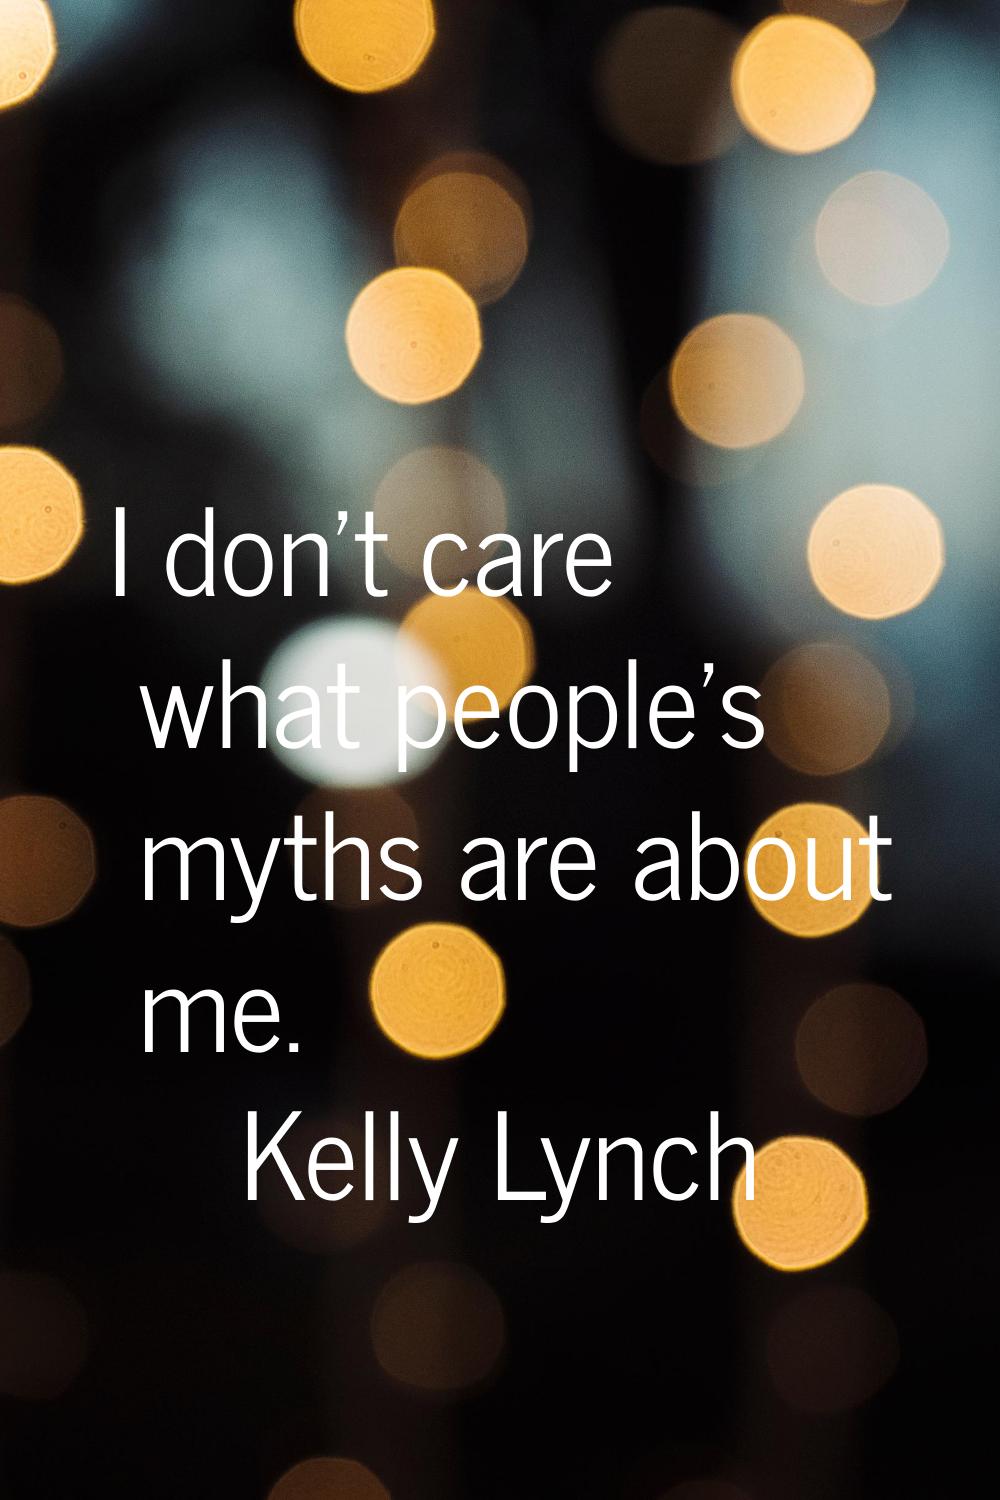 I don't care what people's myths are about me.